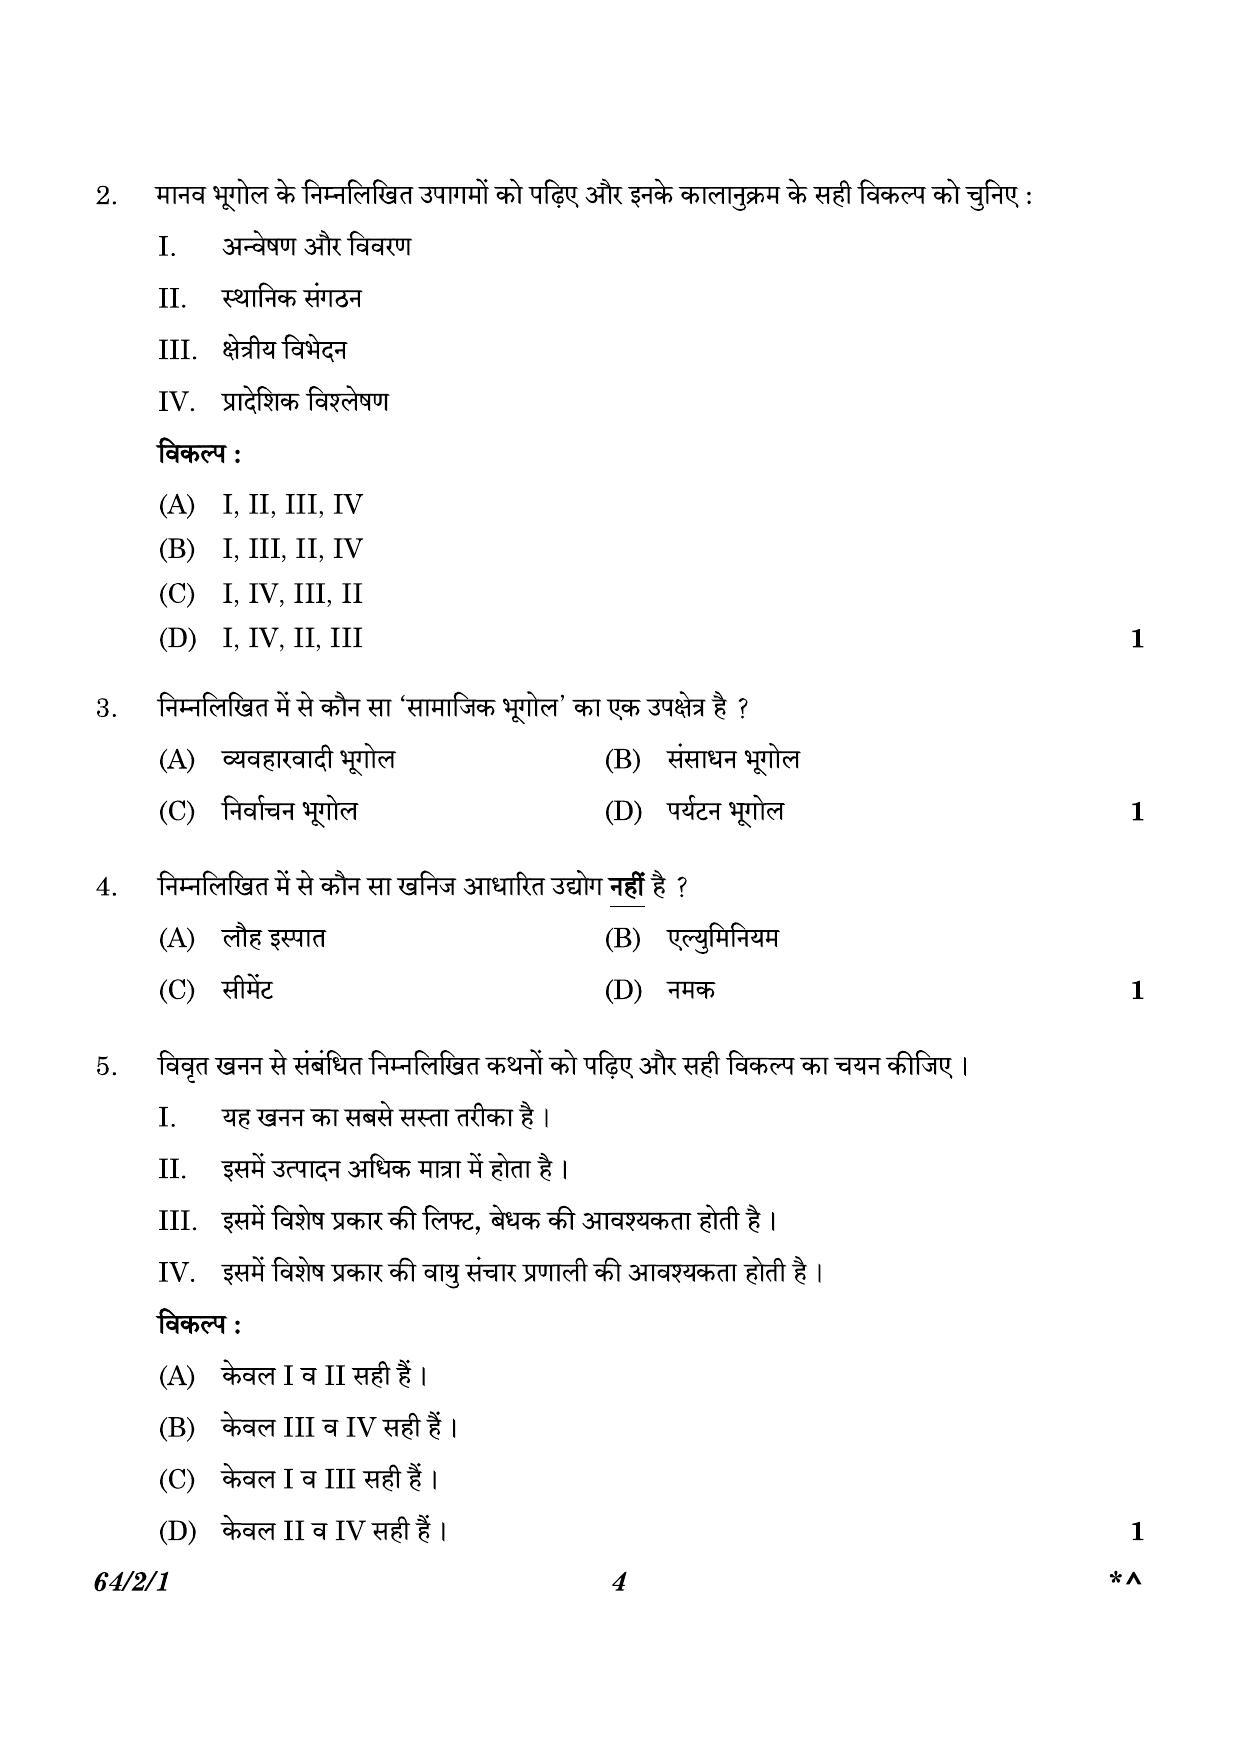 CBSE Class 12 64-2-1 Geography 2023 Question Paper - Page 4